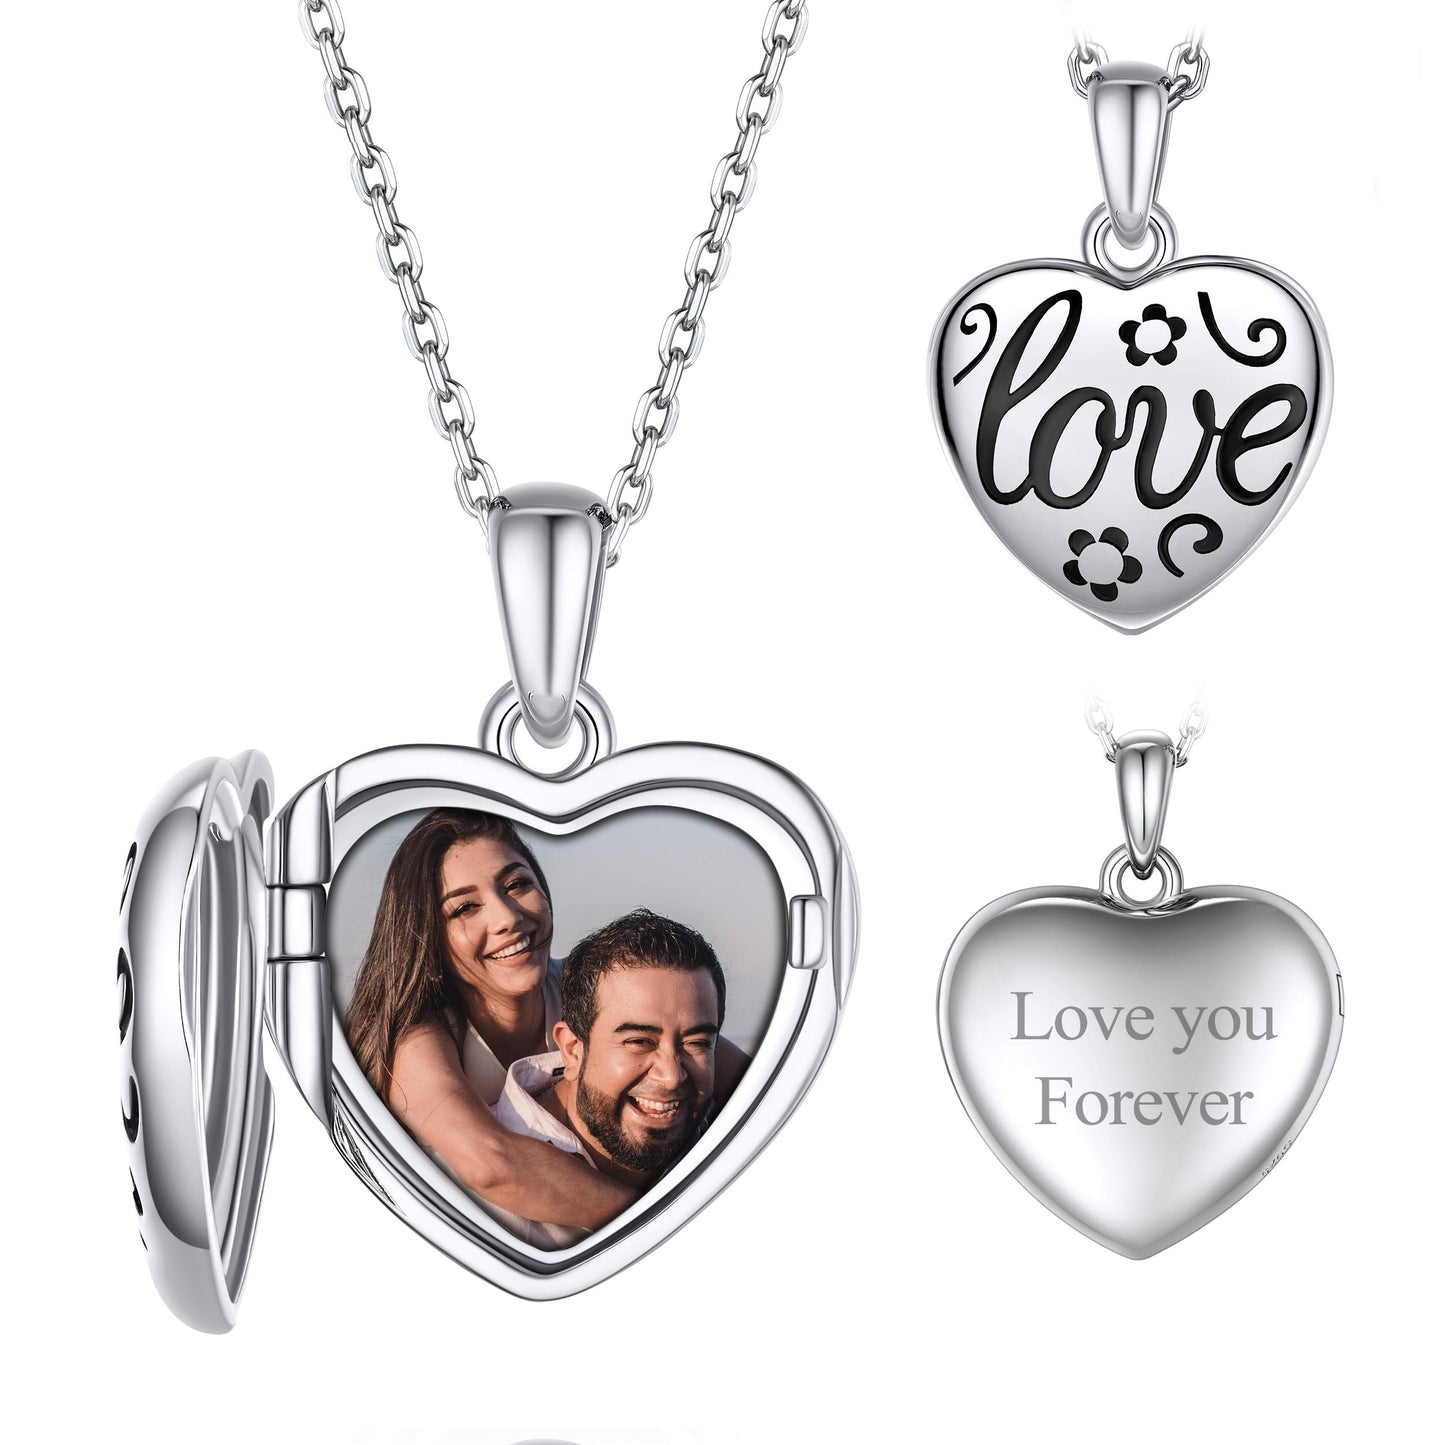 Custom4U Personalized Heart Photo Locket Necklace with Name Engraved